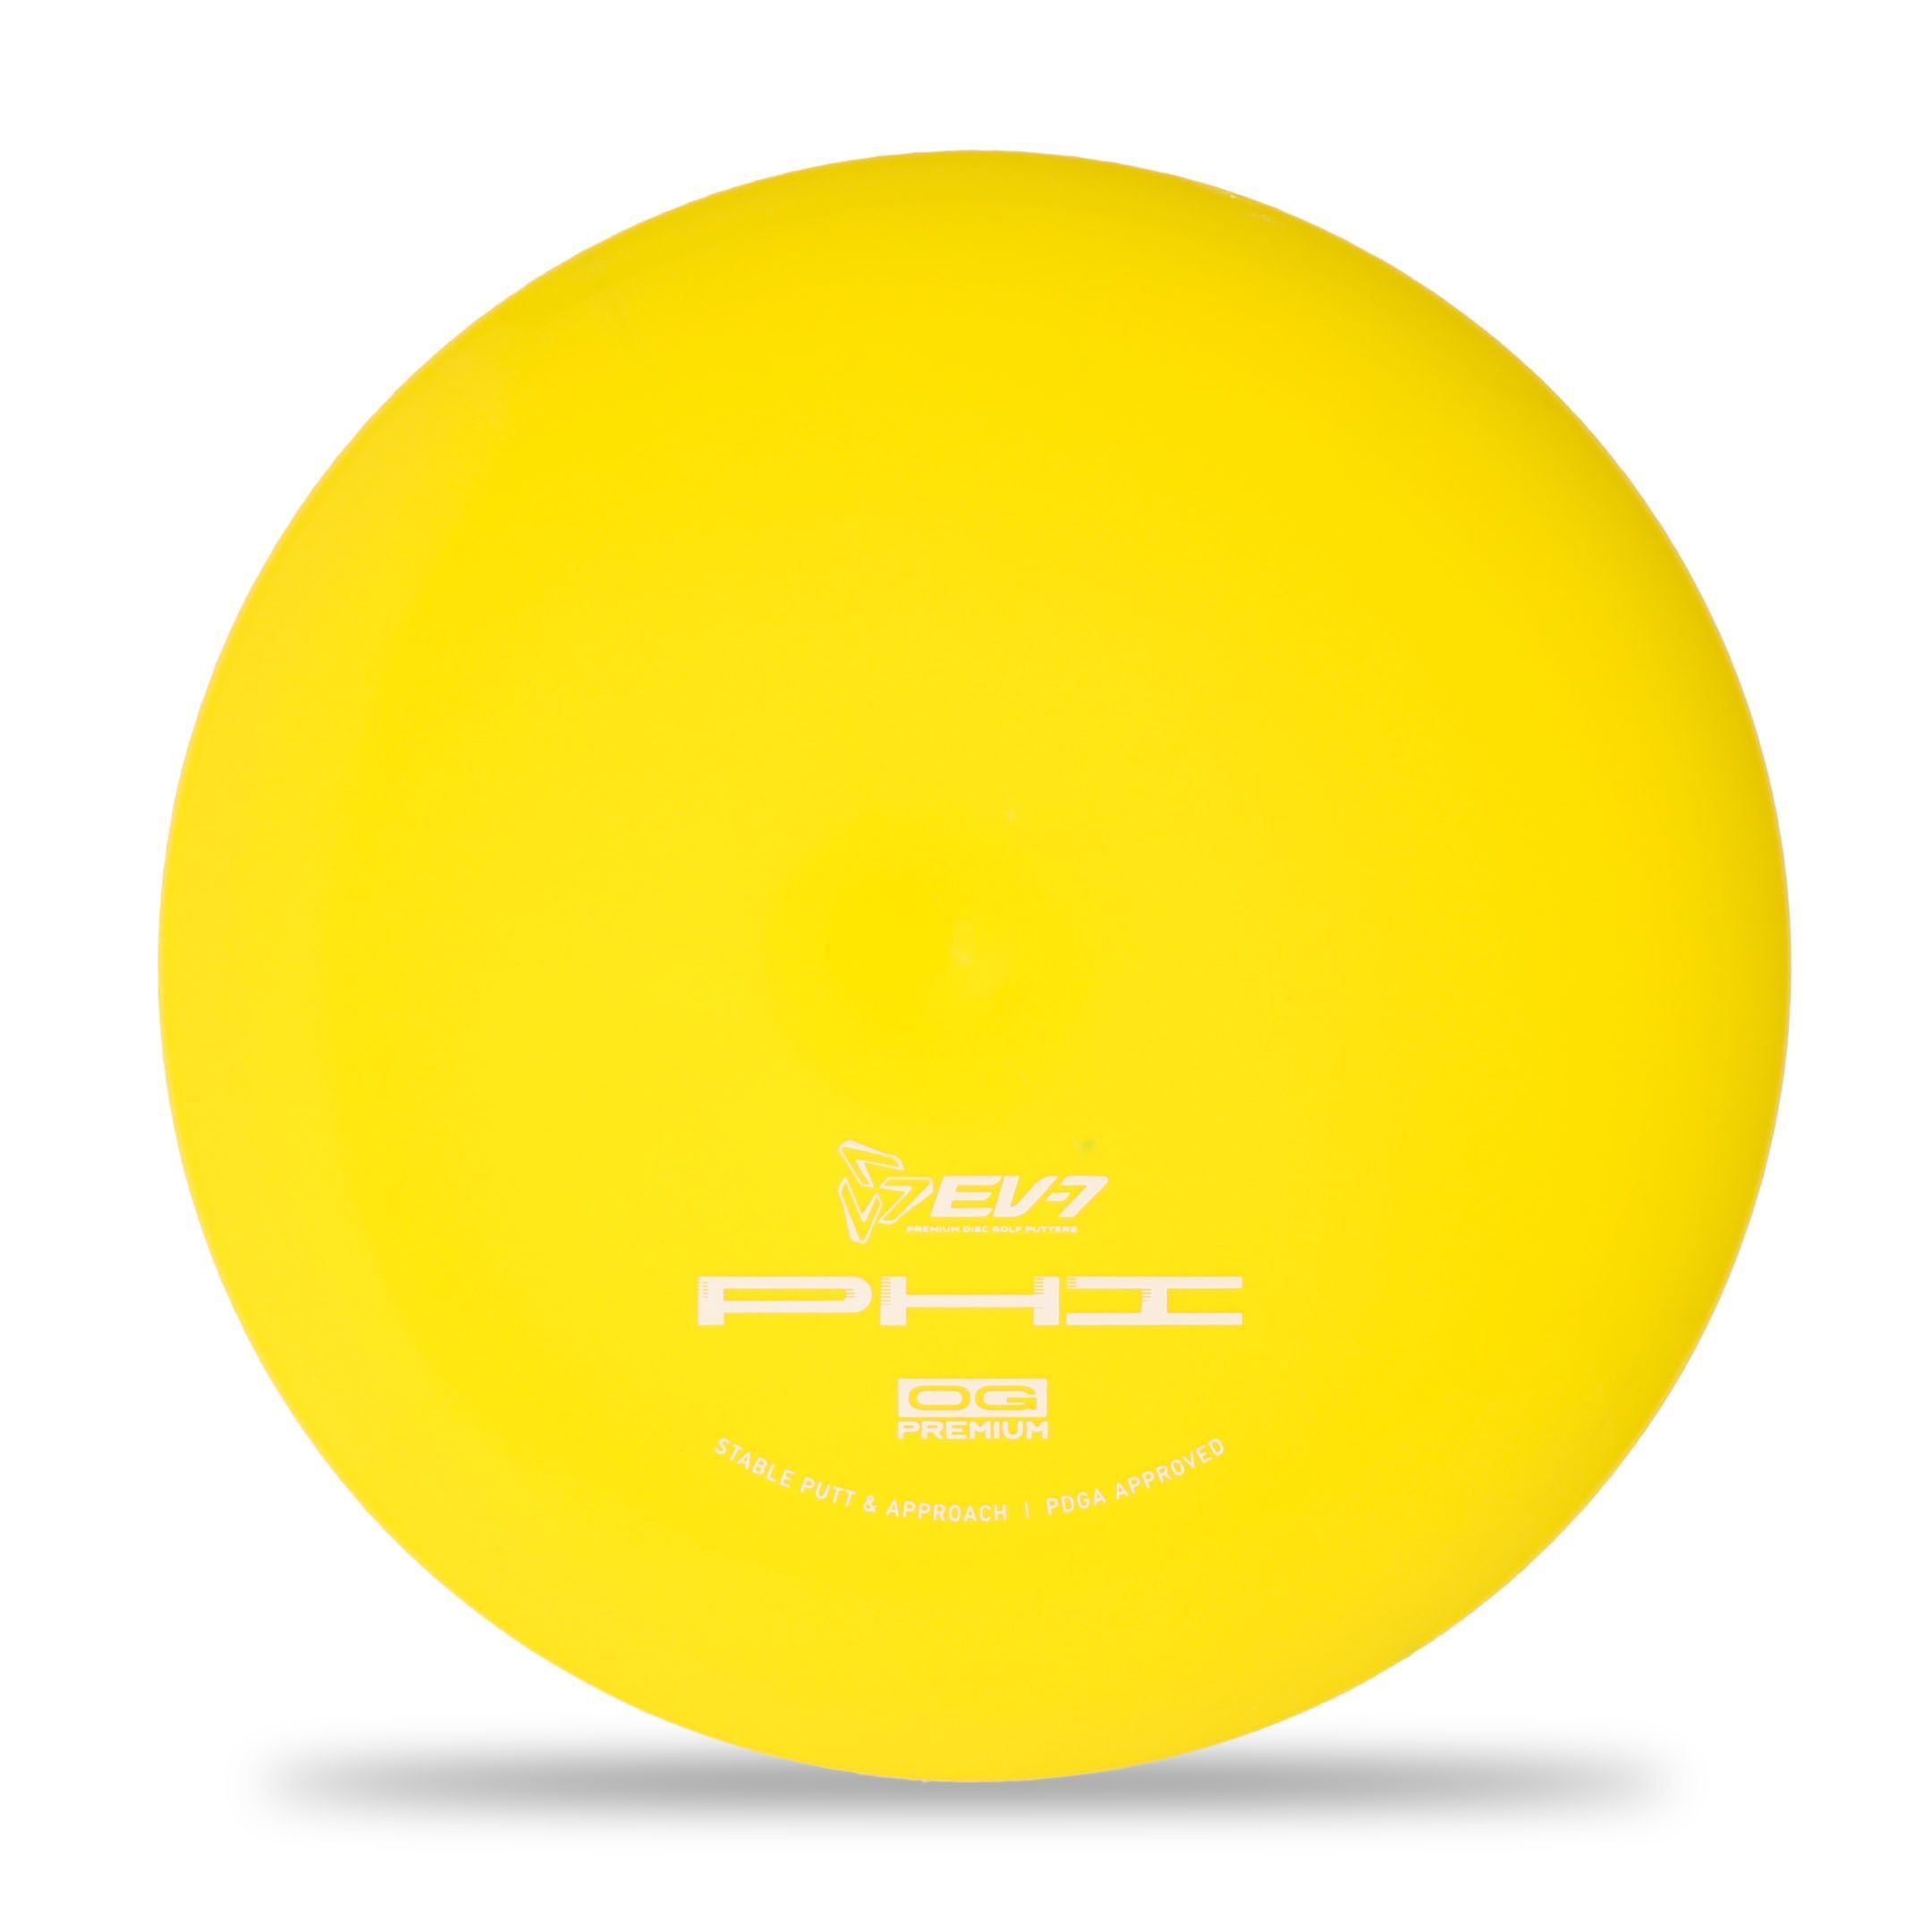 EV-7 Disc Golf + Thought Space Athletics Limited Edition Collab - Eyrachnid  Stamp - Phi Putt and Approach - OG Base - 3/4/0/1